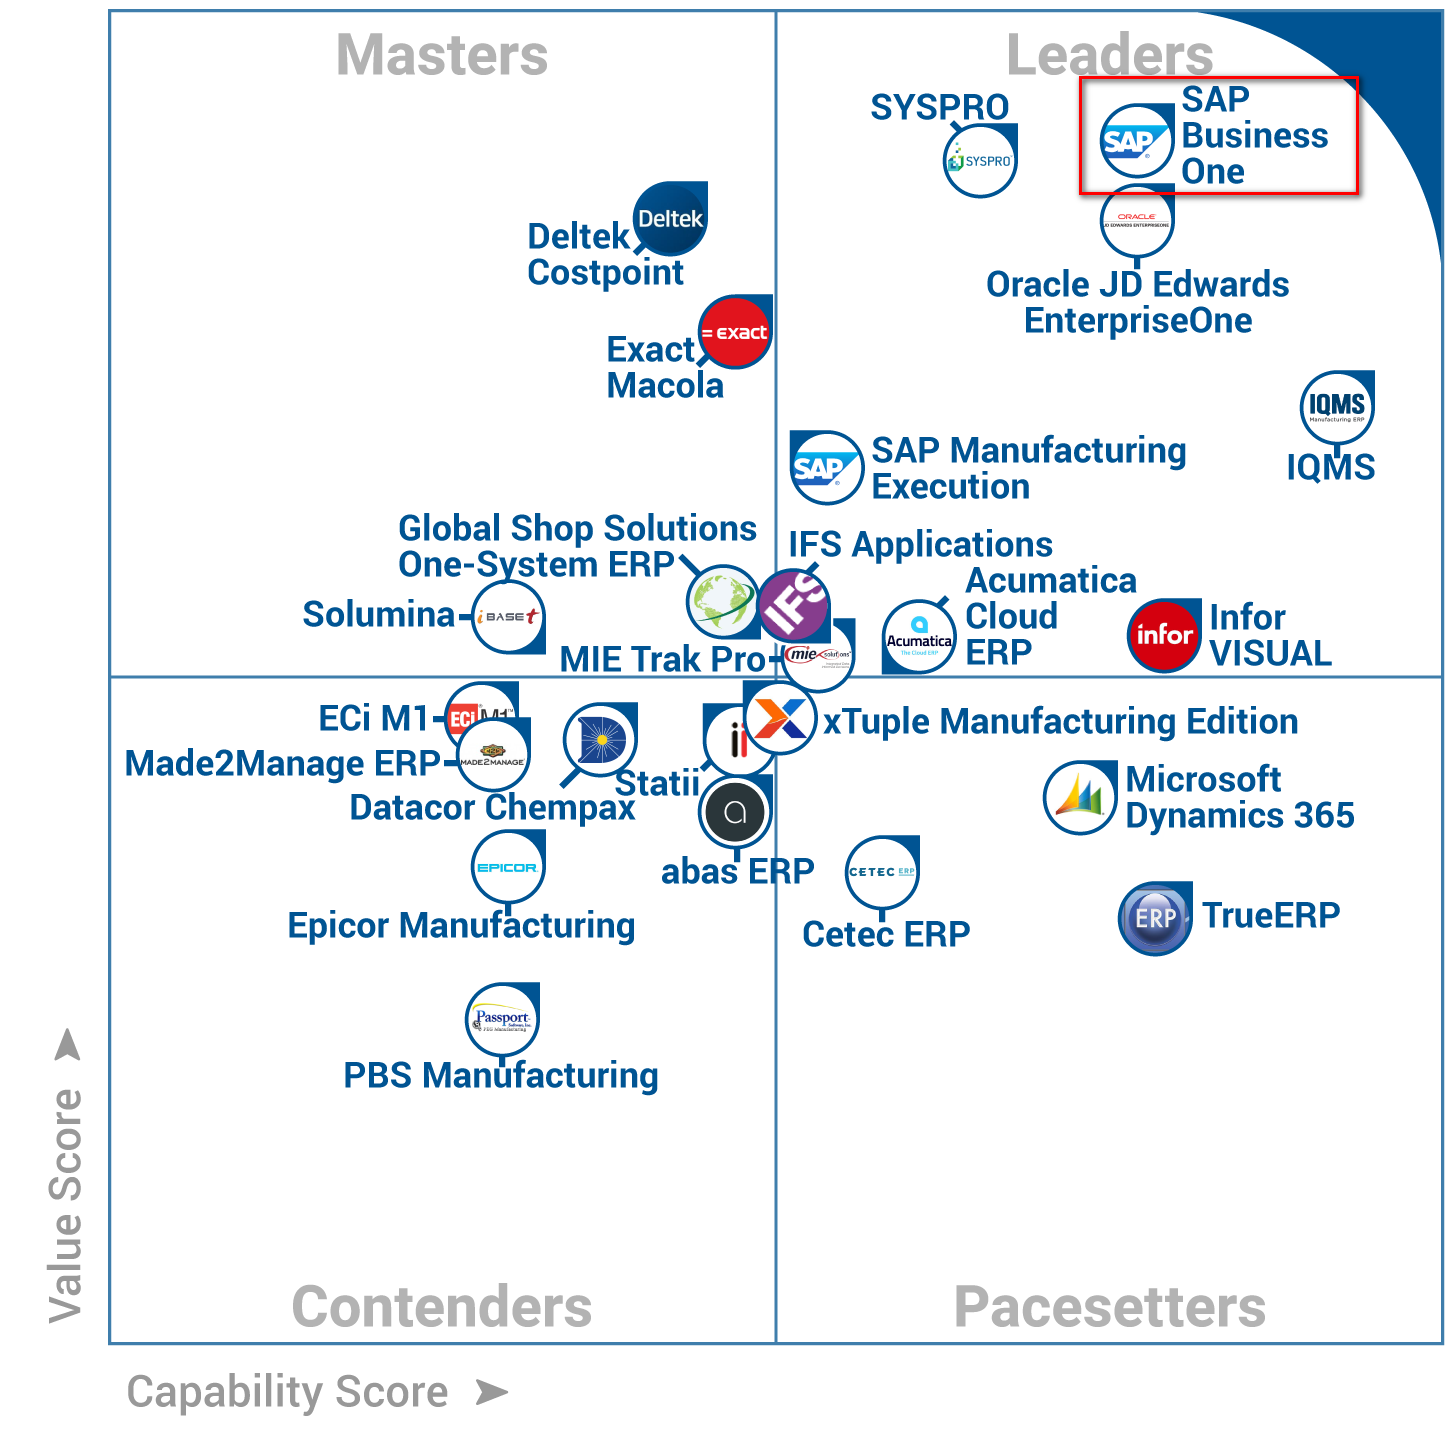 SAP Business One listed at #1 Frontrunner for Manufacturing Products by Gartner.